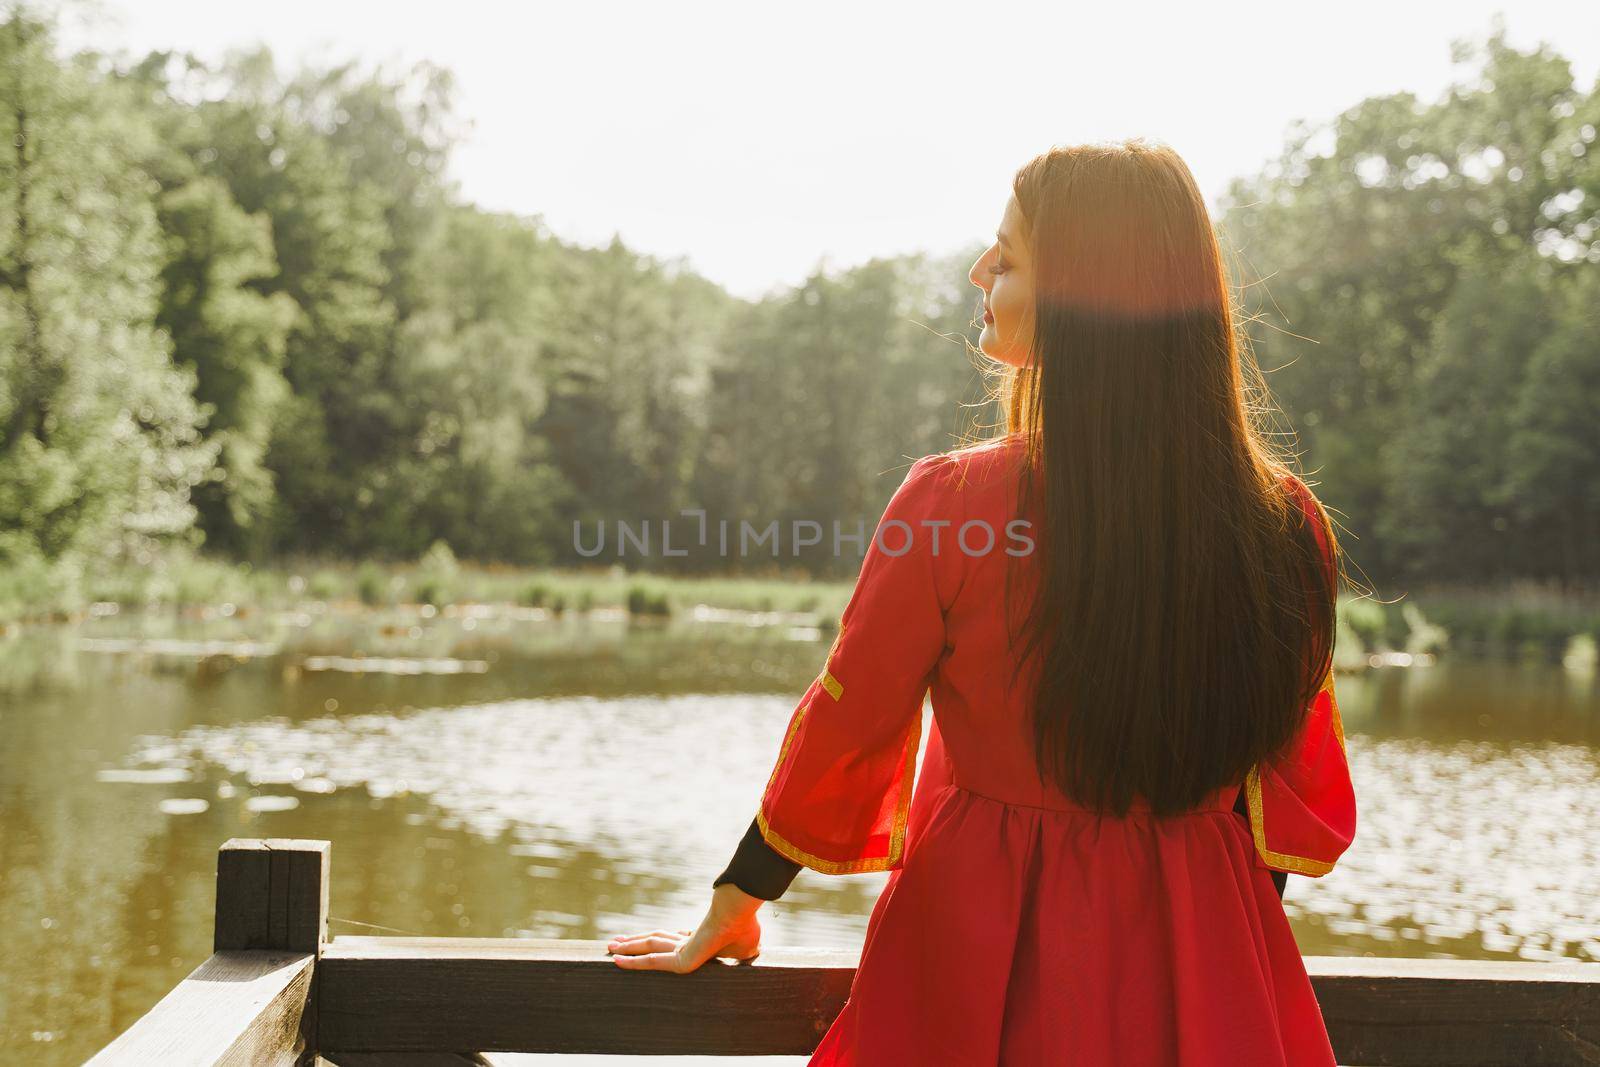 Georgian woman in red national dress with cross symbols. Attractive woman on the lake with forest background. Georgian culture lifestyle. Woman looks left side. by Rabizo